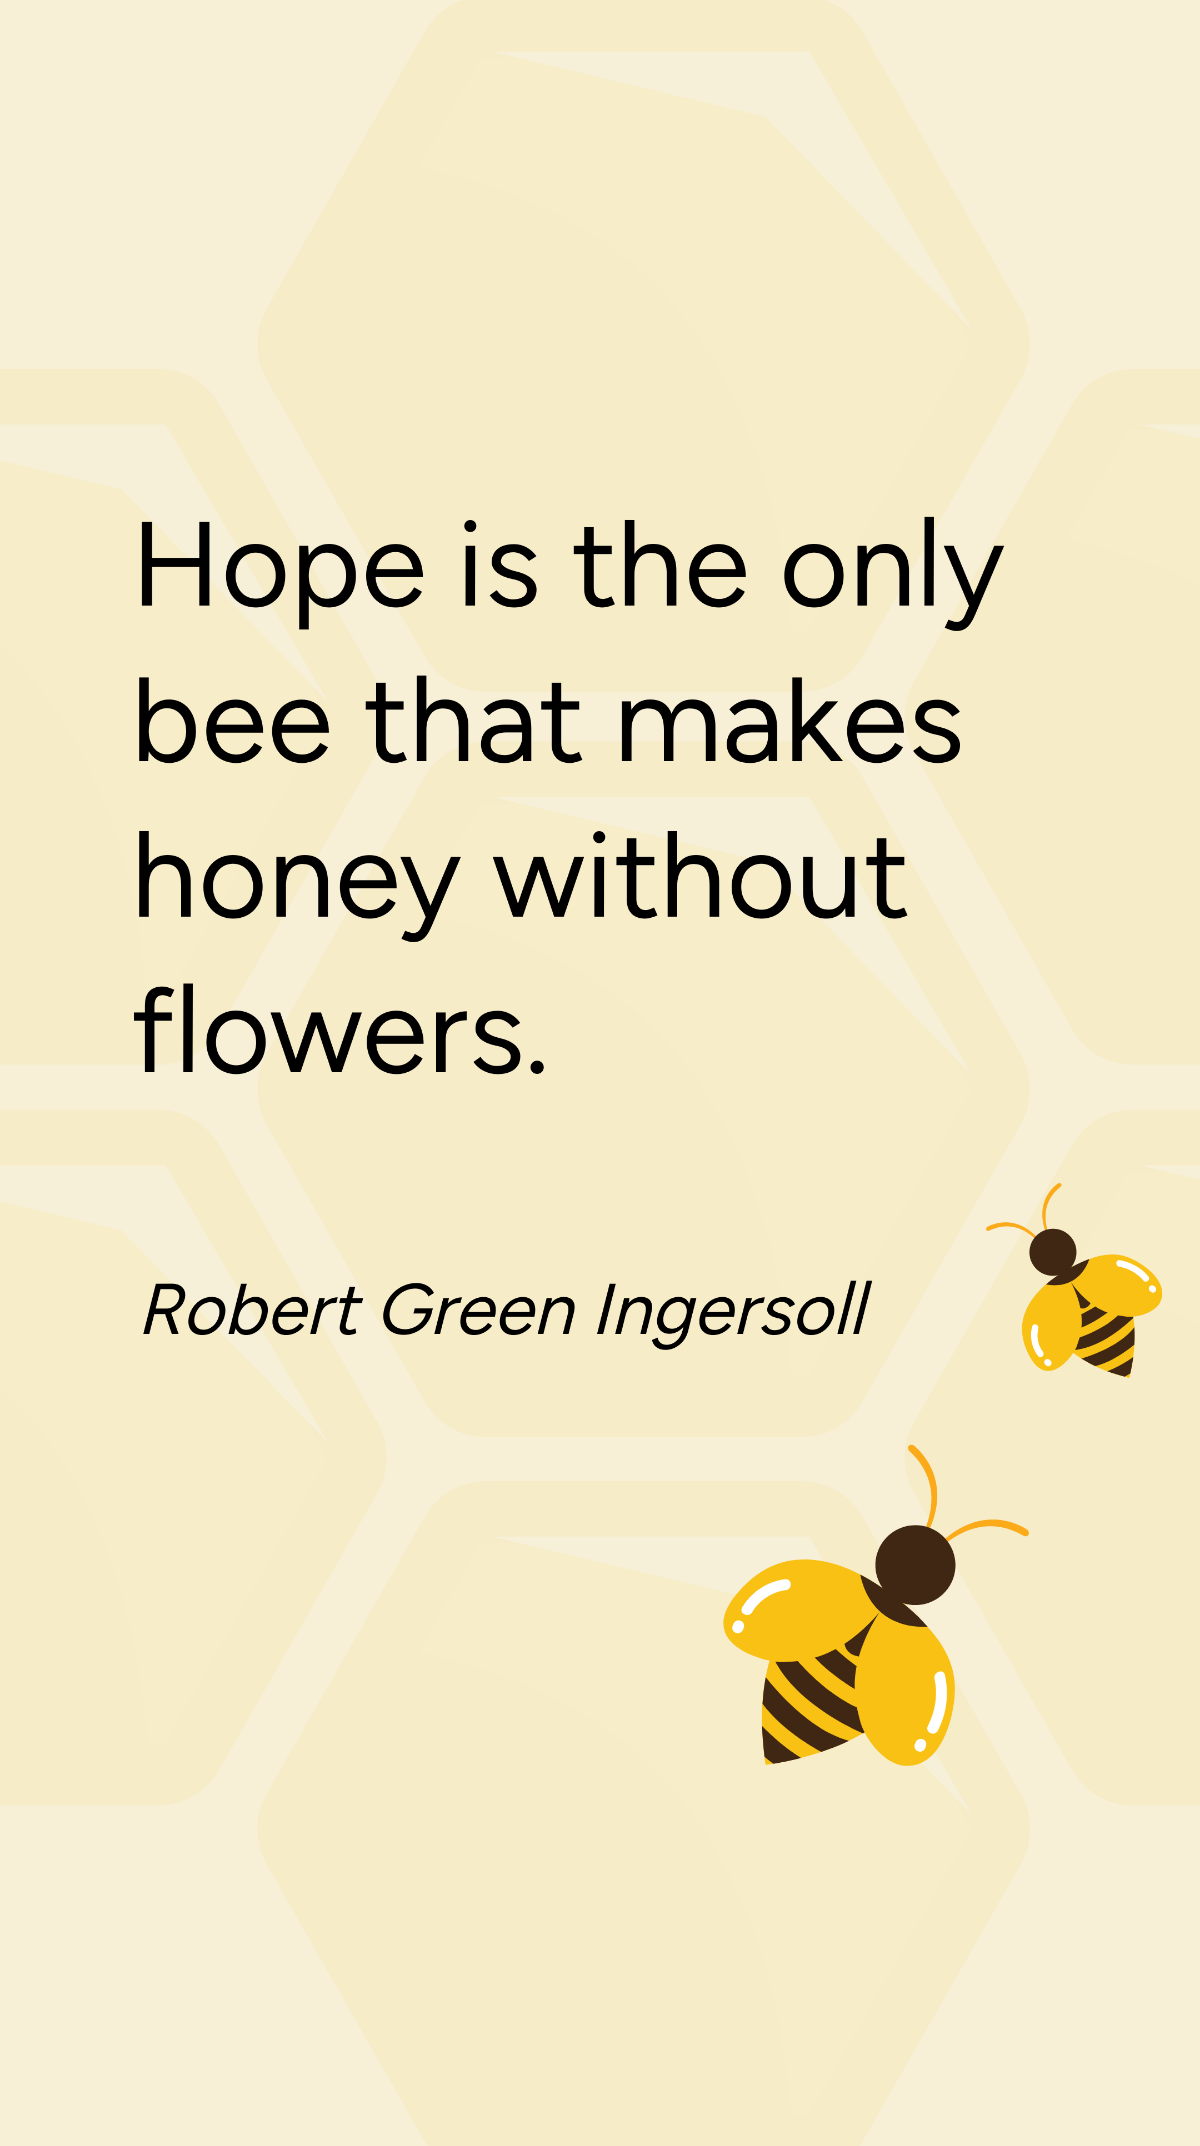 Robert Green Ingersoll - Hope is the only bee that makes honey without flowers. Template